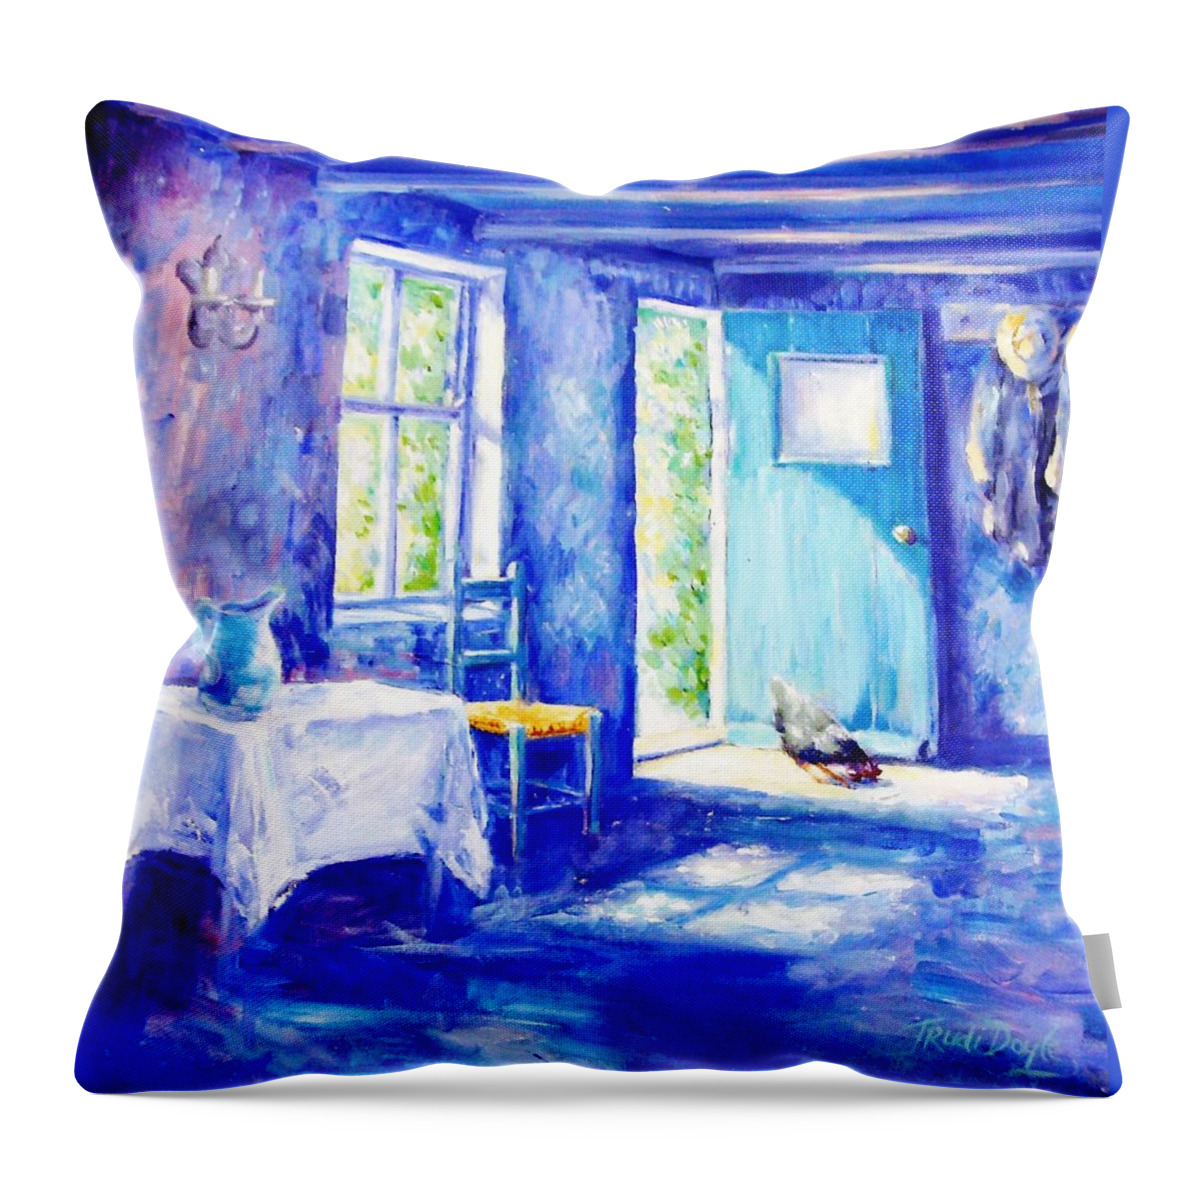 Summer Morning Throw Pillow featuring the painting Summer Morning by Trudi Doyle